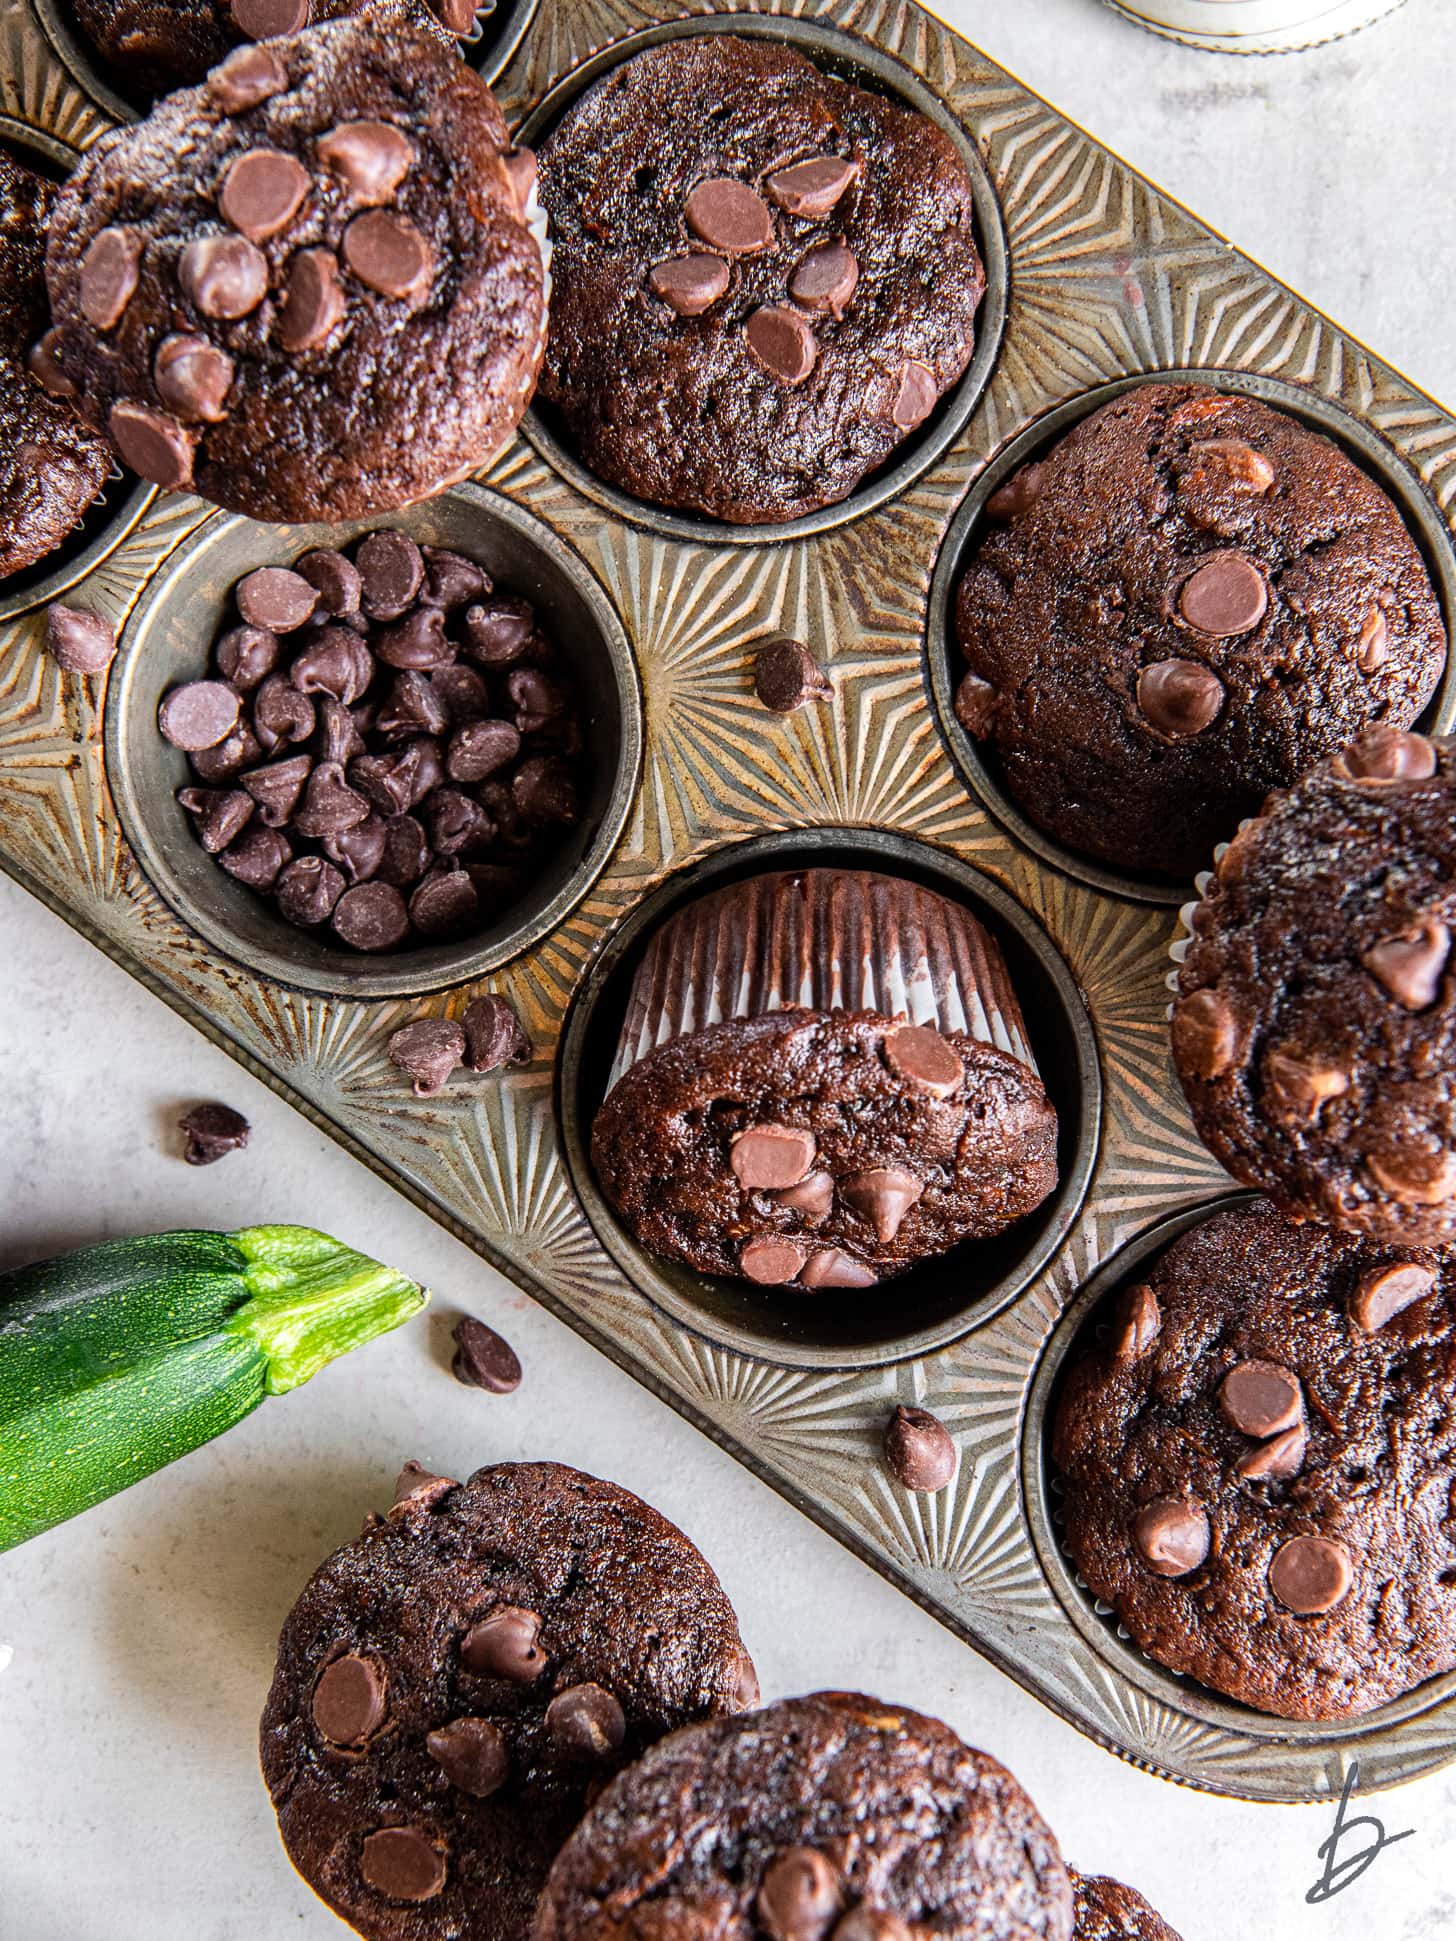 double chocolate zucchini muffins in a muffin tine with chocolate chips and zucchini next to it.